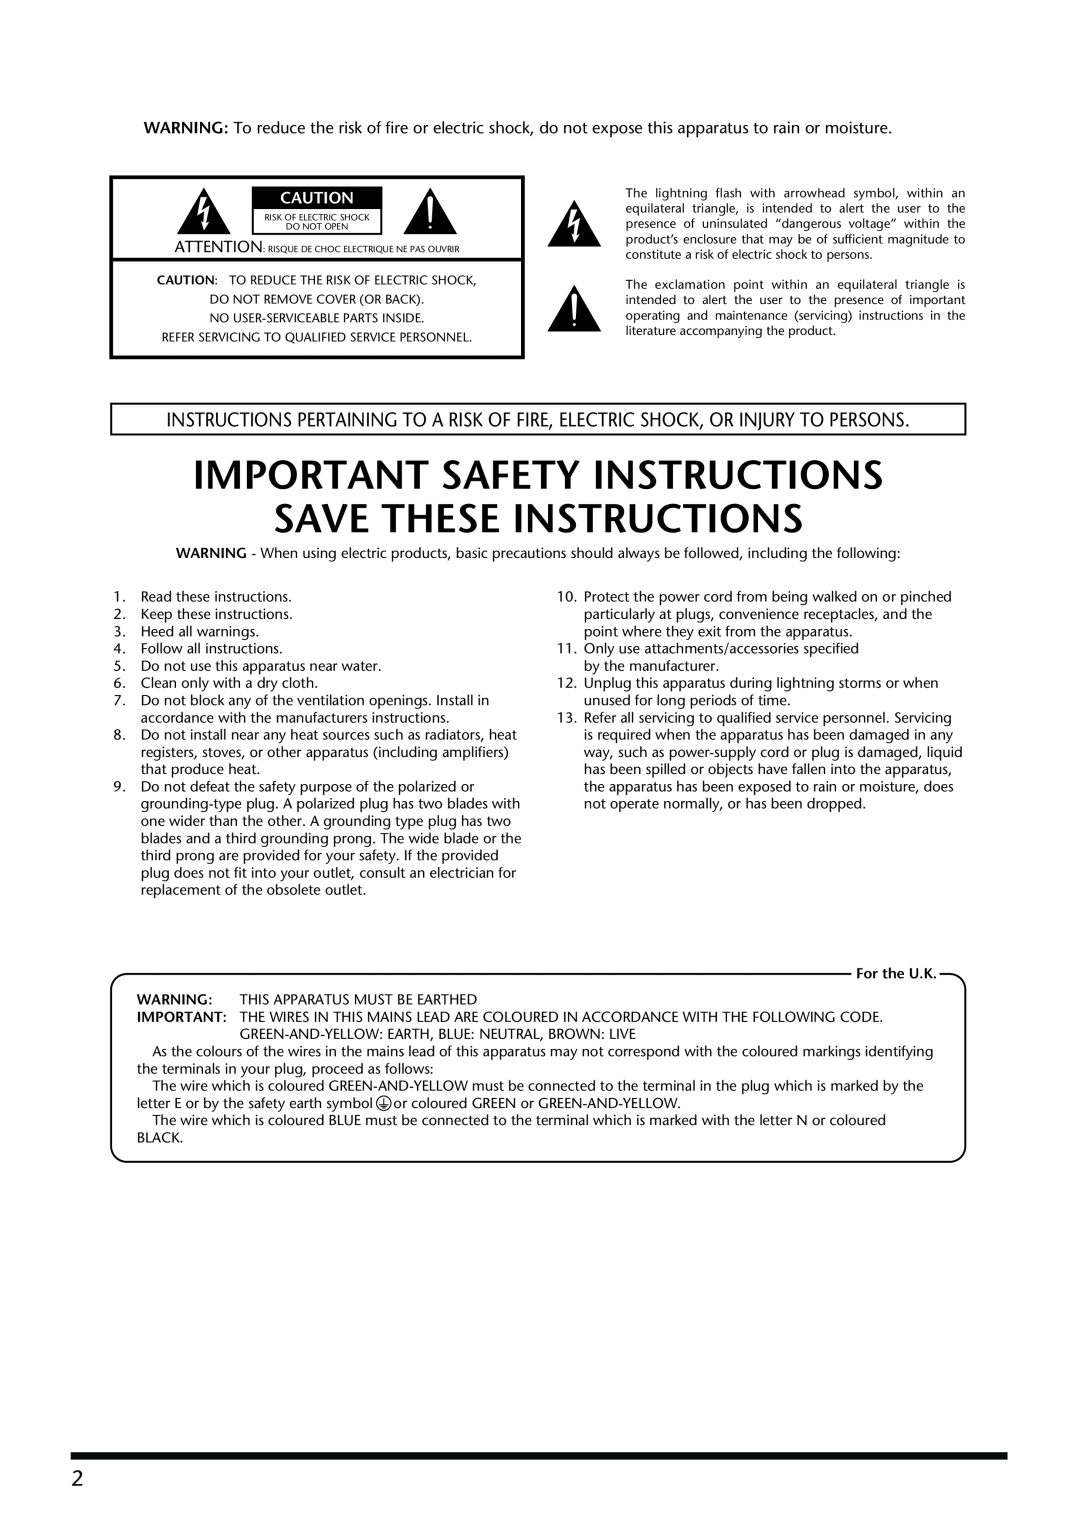 Roland S-OPT owner manual Important Safety Instructions, Save These Instructions, For the U.K 